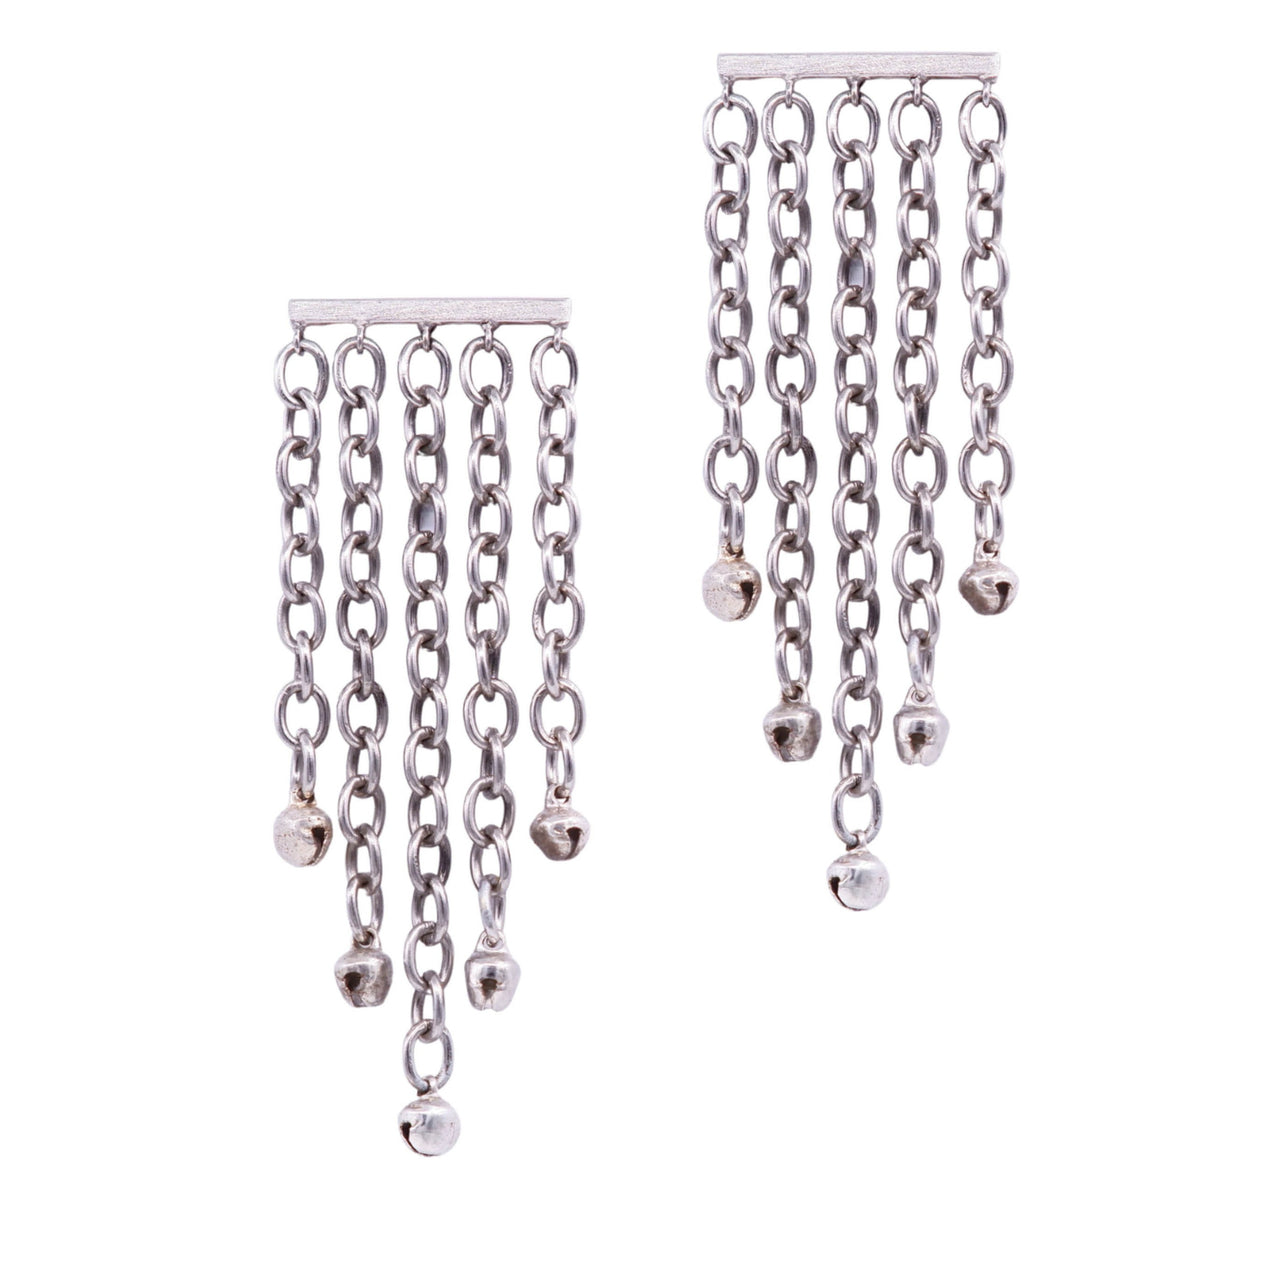 Chain design long earrings - Silver plated